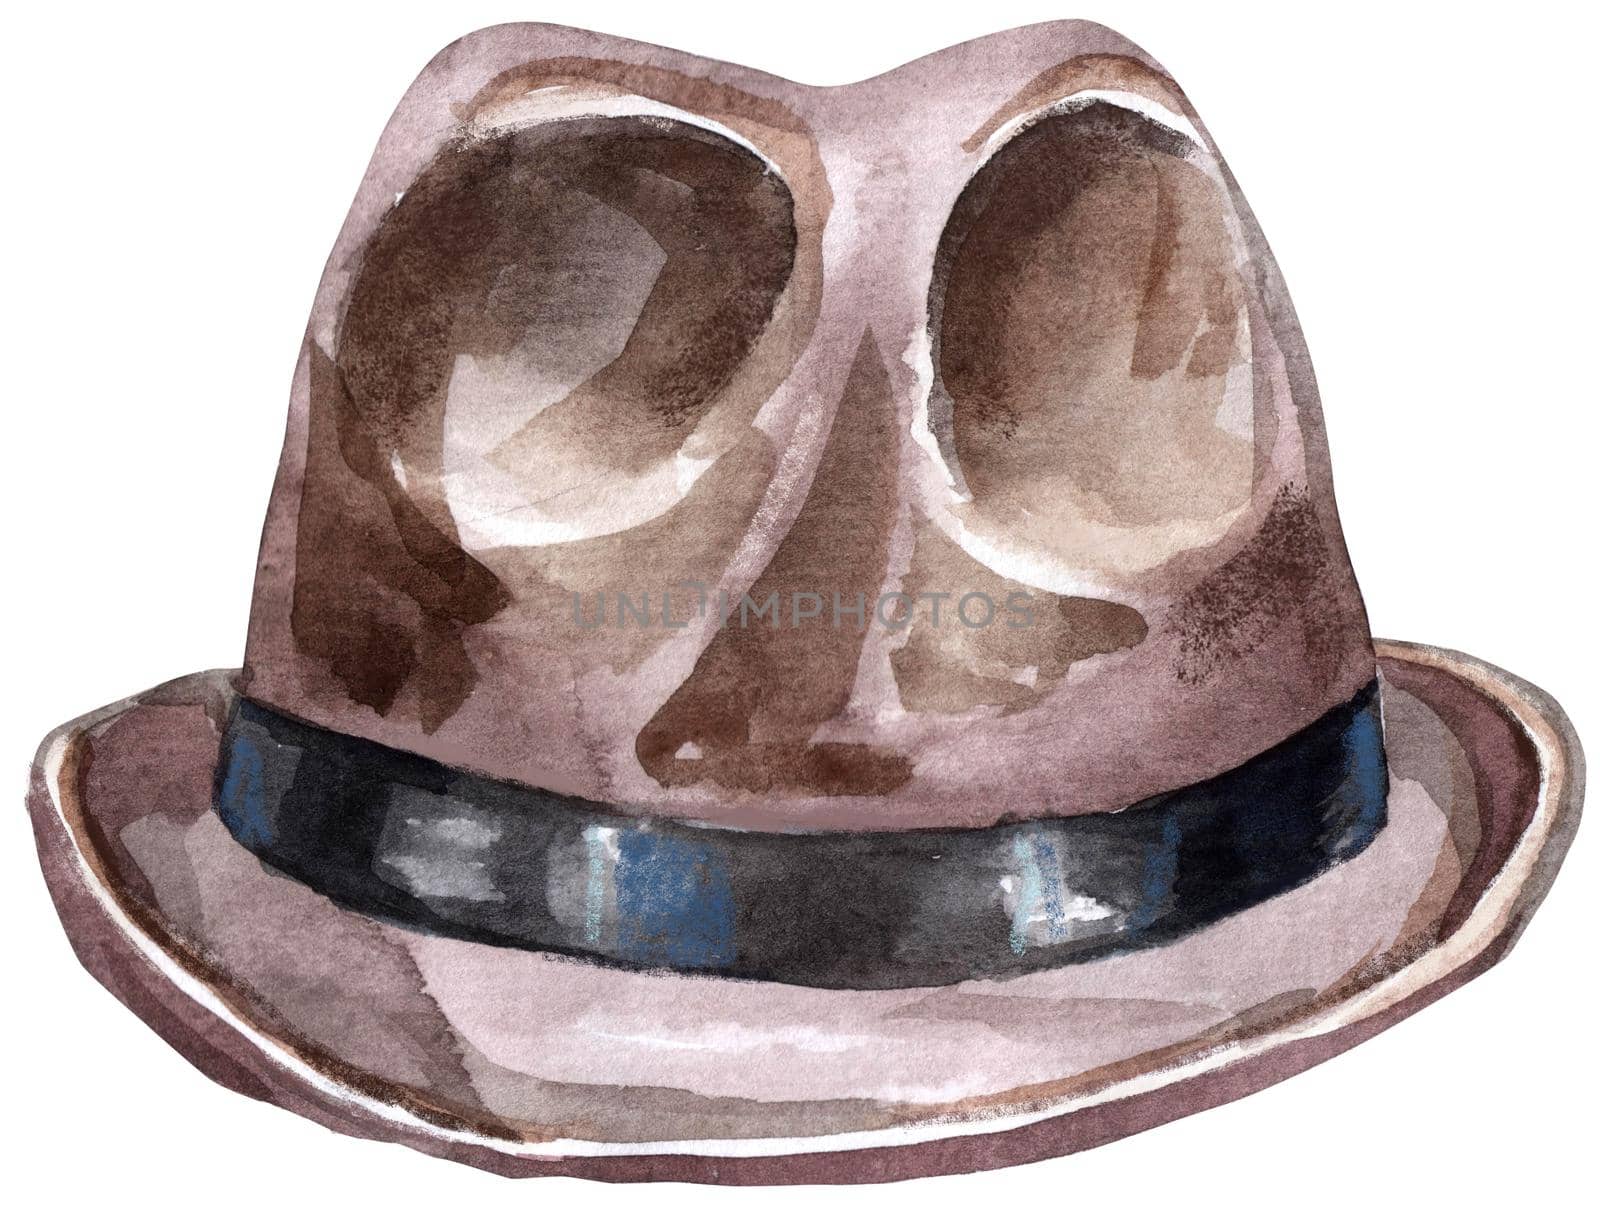 Watercolor men's brown hat with black ribbon illustration. For clothing design